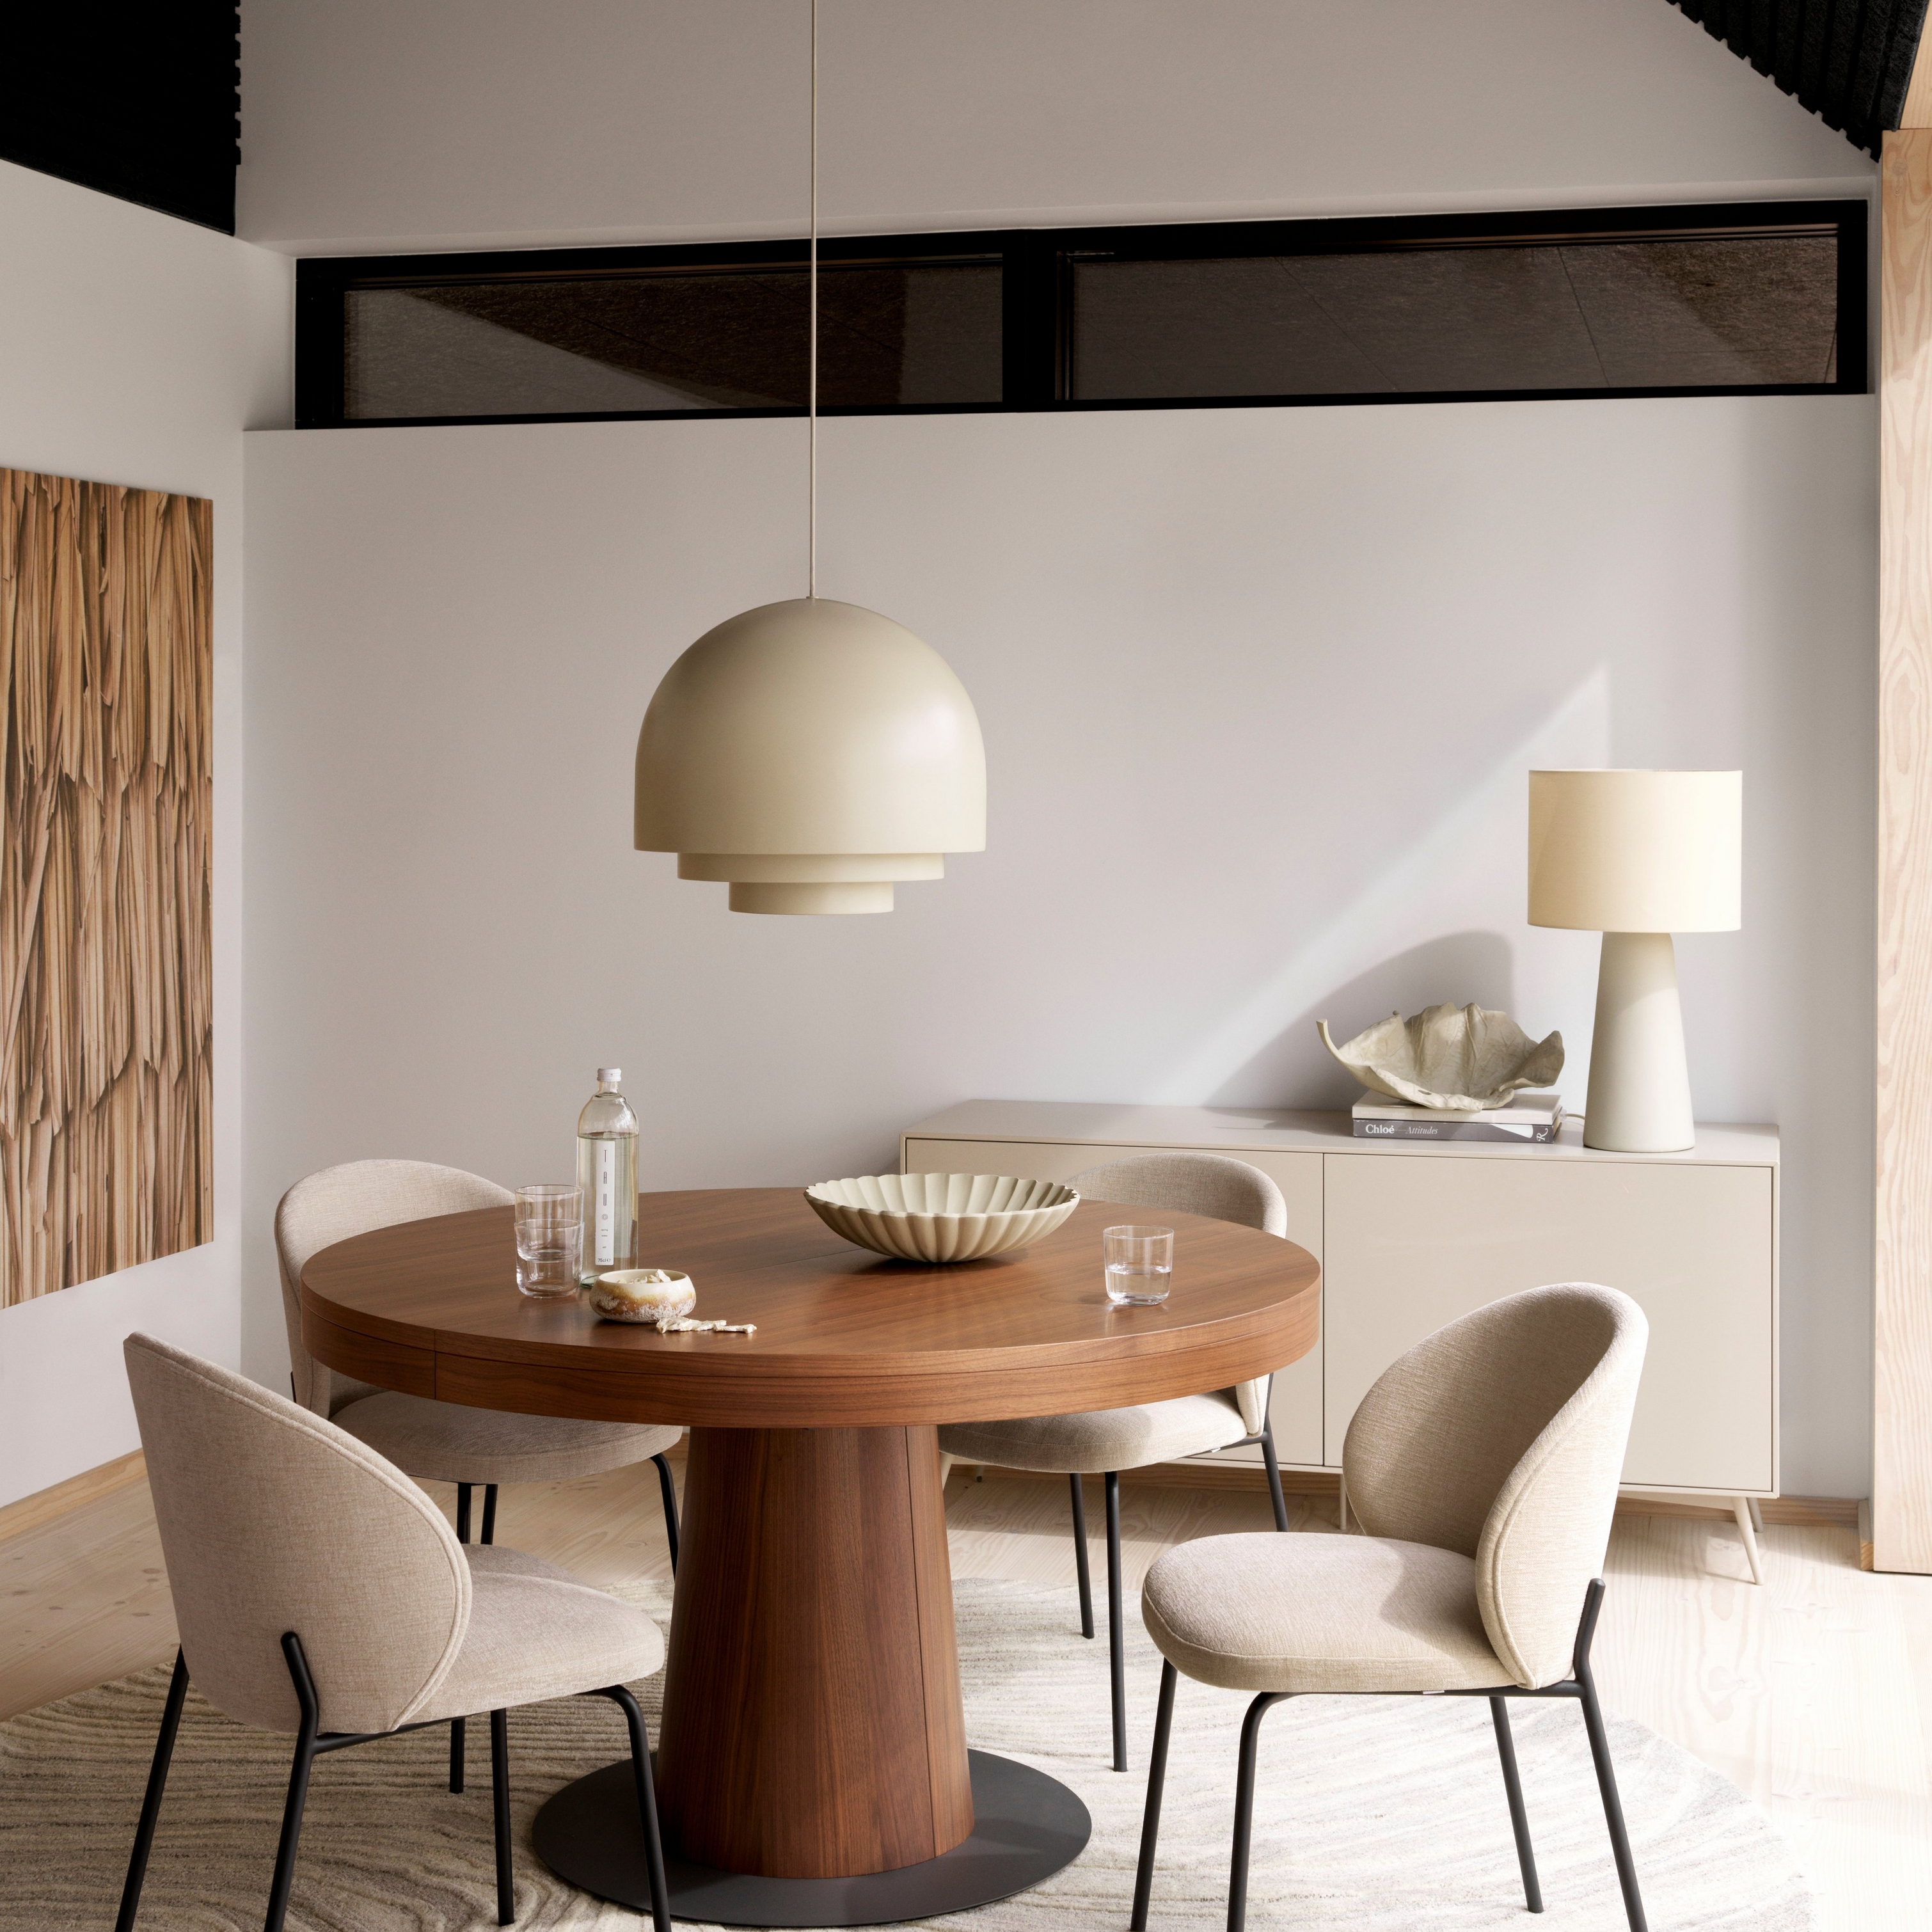 Modern dining room with round wooden Granada table, beige Princeton chairs, pendant light, and cream carpet